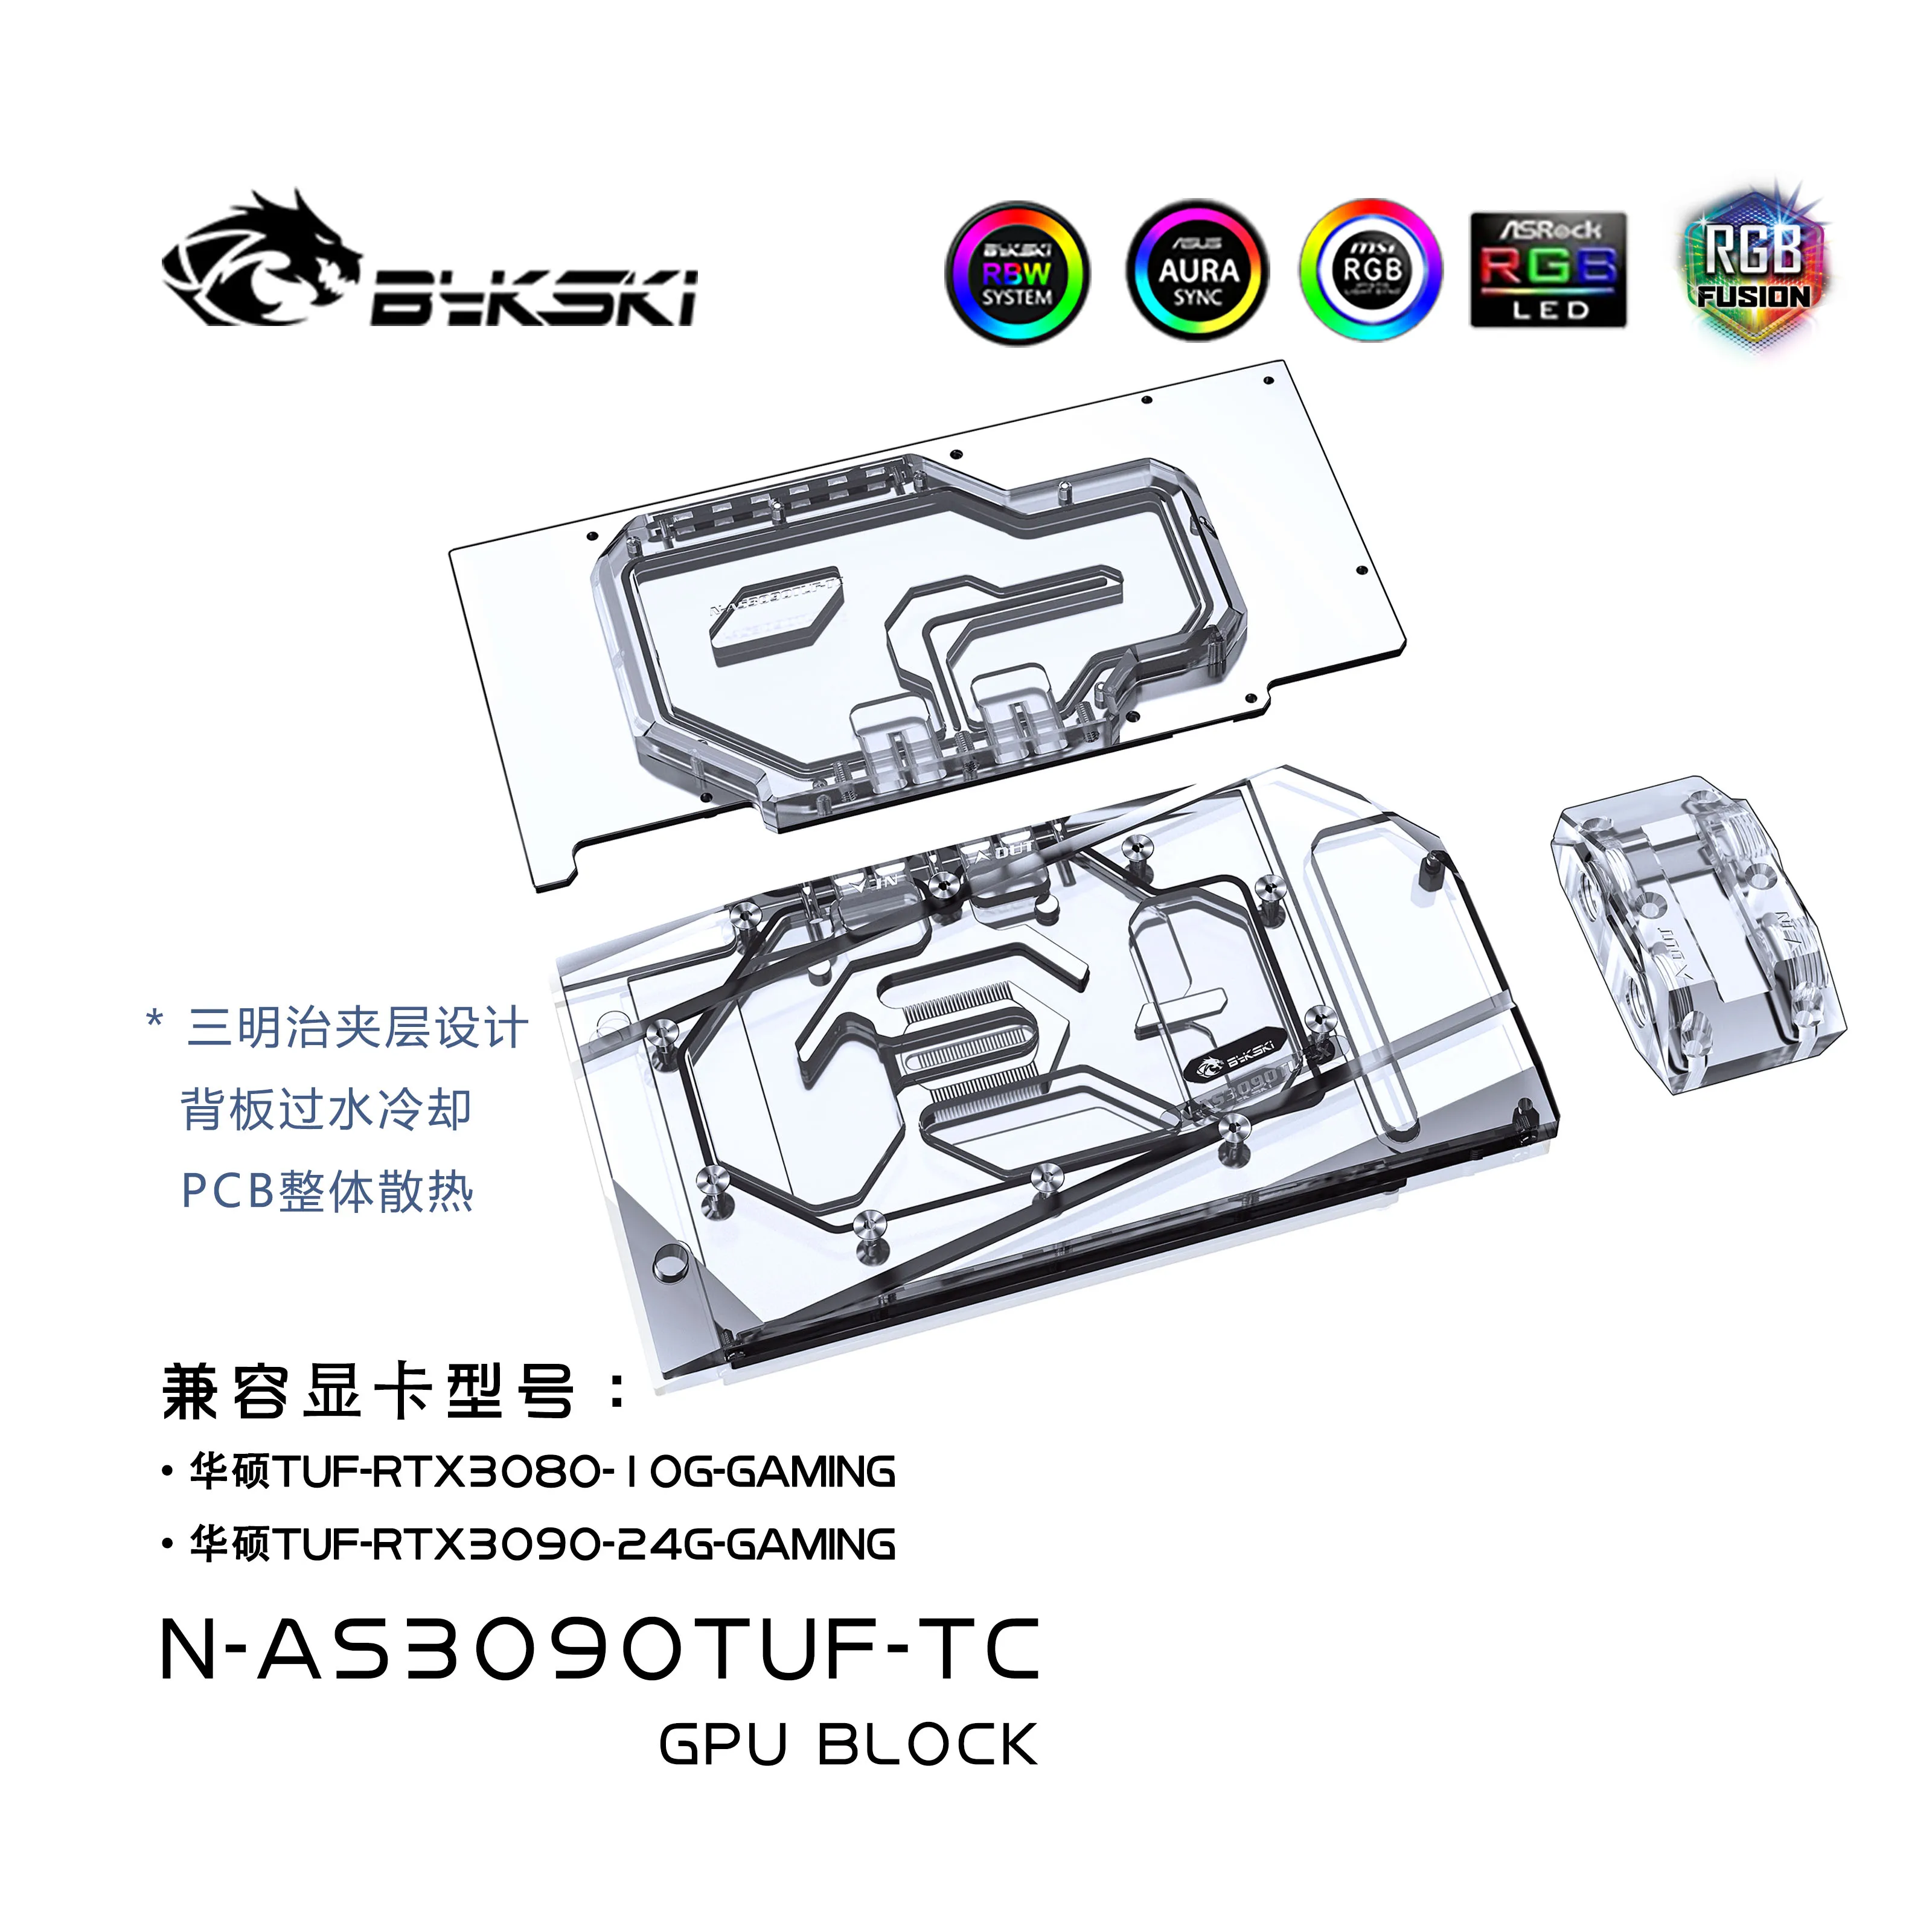 

Bykski N-AS3090TUF-TC GPU Water Block cooler for ASUS TUF RTX 3090 /3080 GAMING Graphic Card with Special Copper Back plate